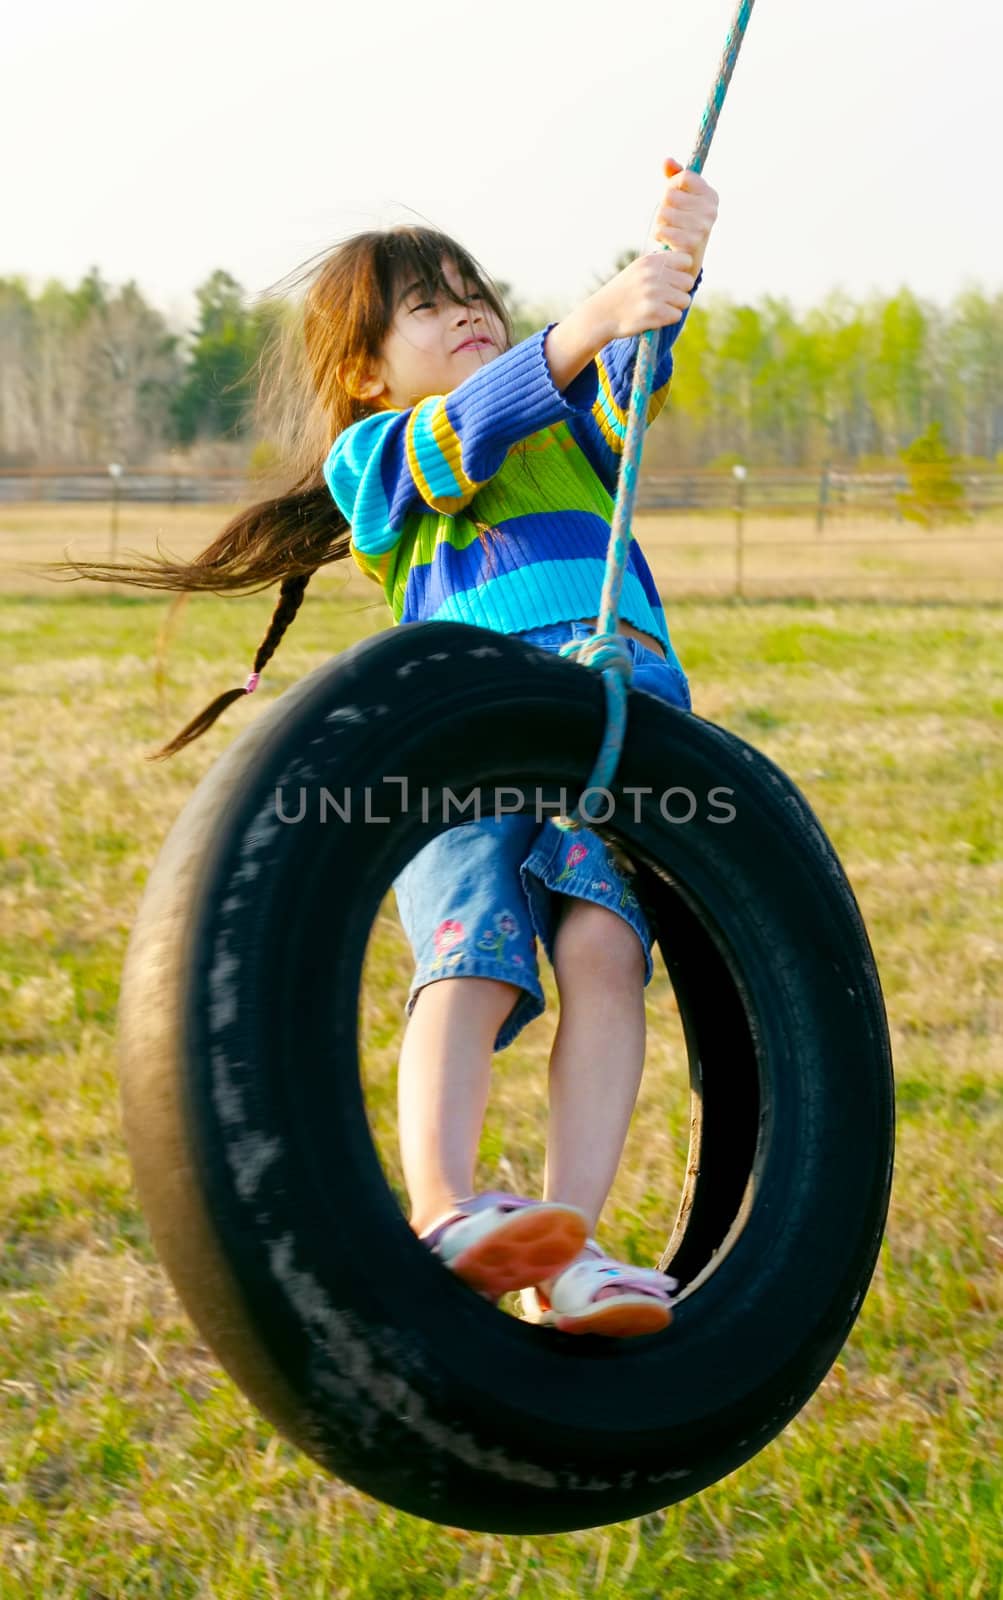 Little girl swinging on tire swing in the countryside by jarenwicklund